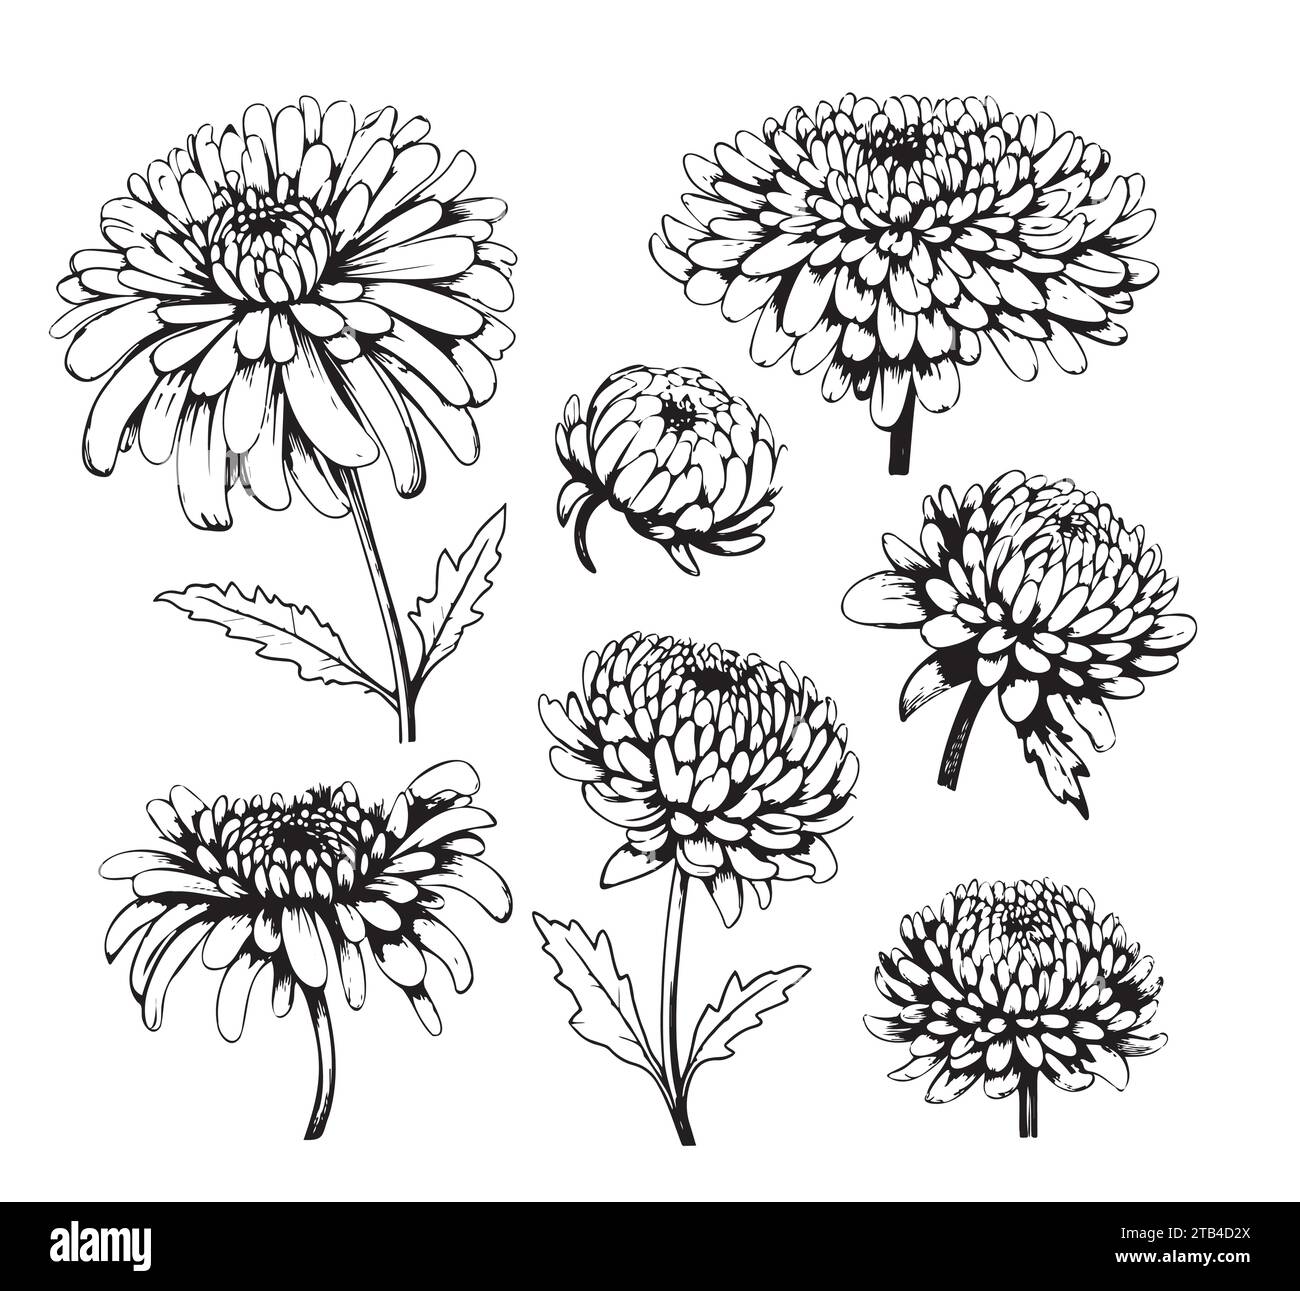 Set of hand drawn chrysanthemum flowers, branches, leaves isolated on a white background. Black and white illustration in sketch engraving style Stock Vector